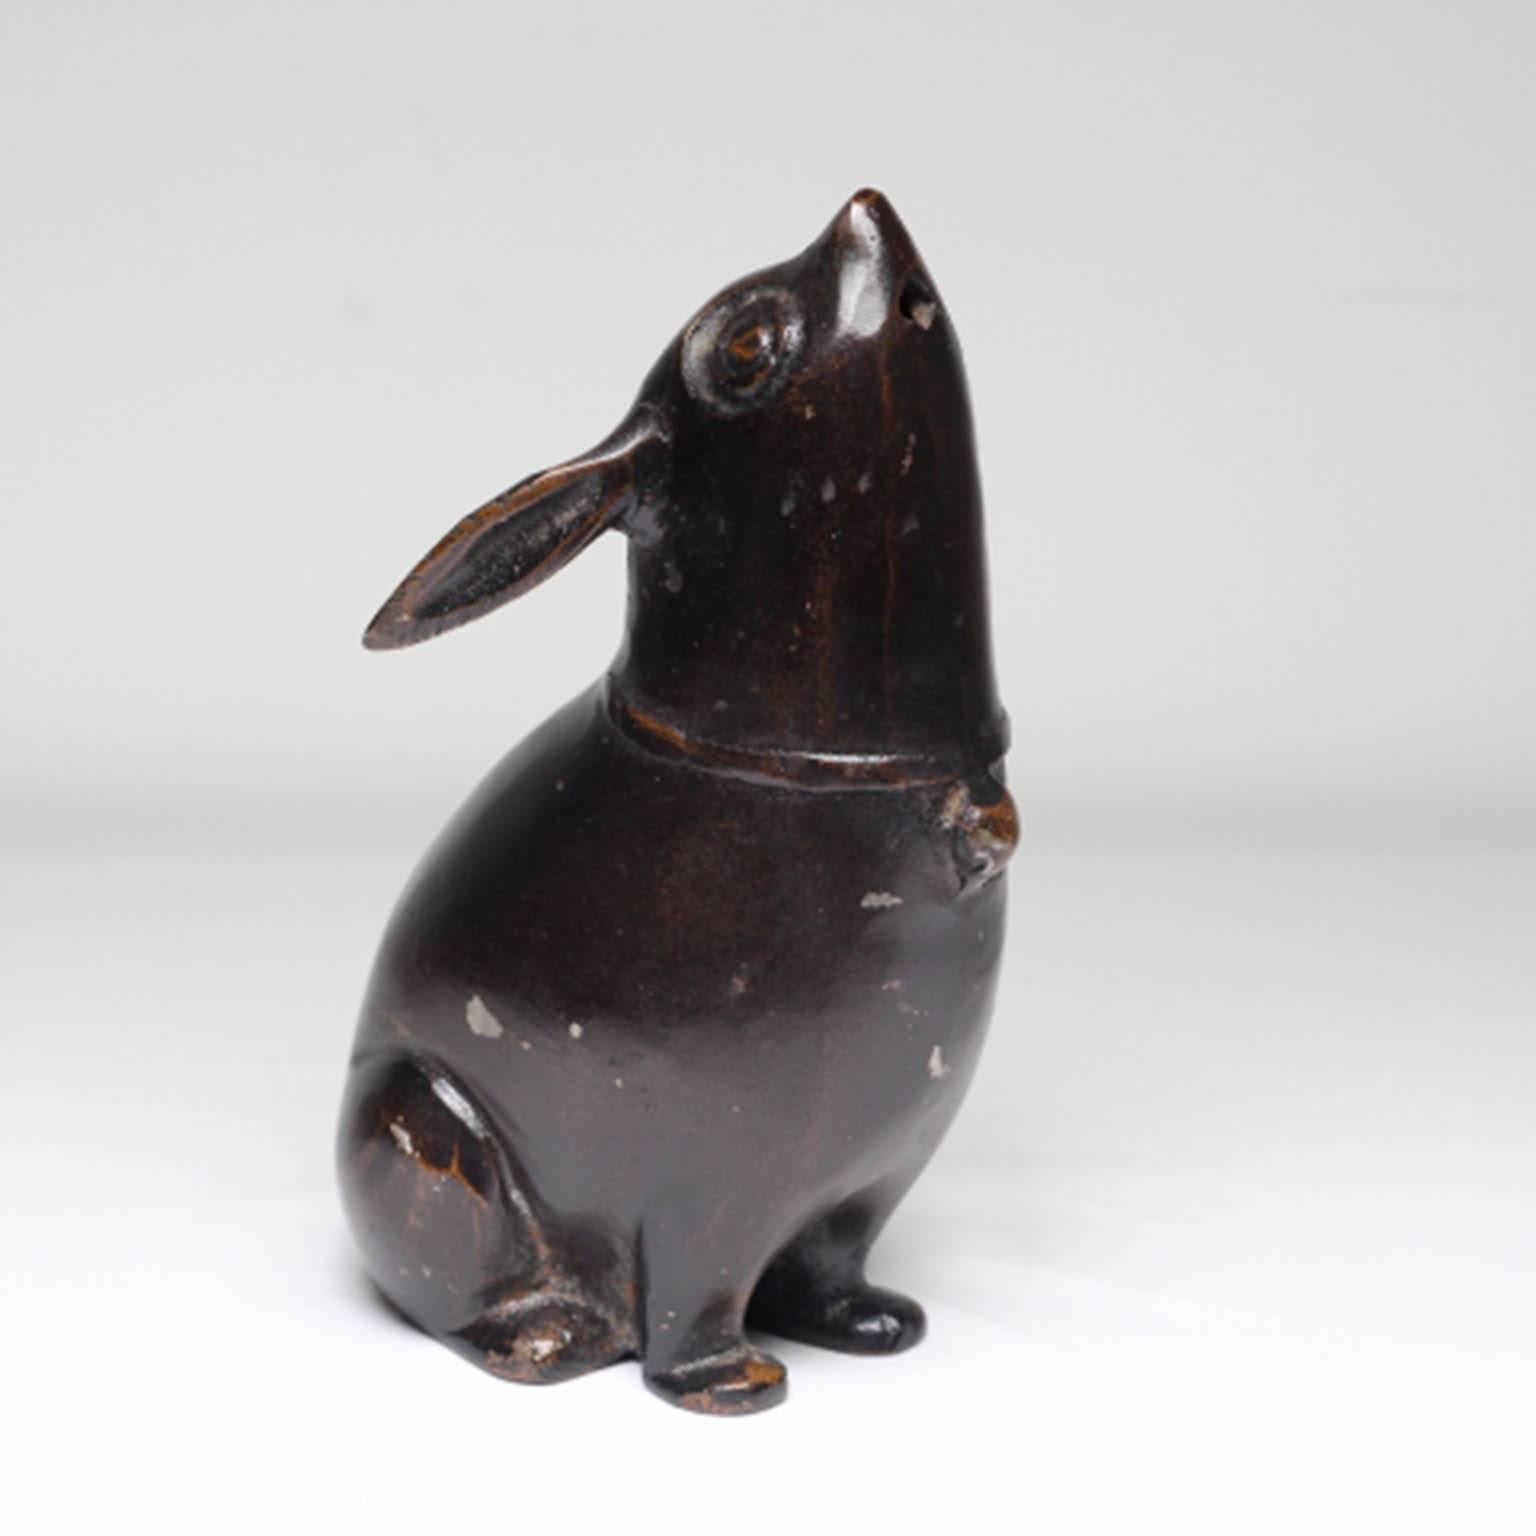 Charming bronze Japanese rabbit incense burner, circa 1940-1960. The incense is held in the mouth of the rabbit while it burns.